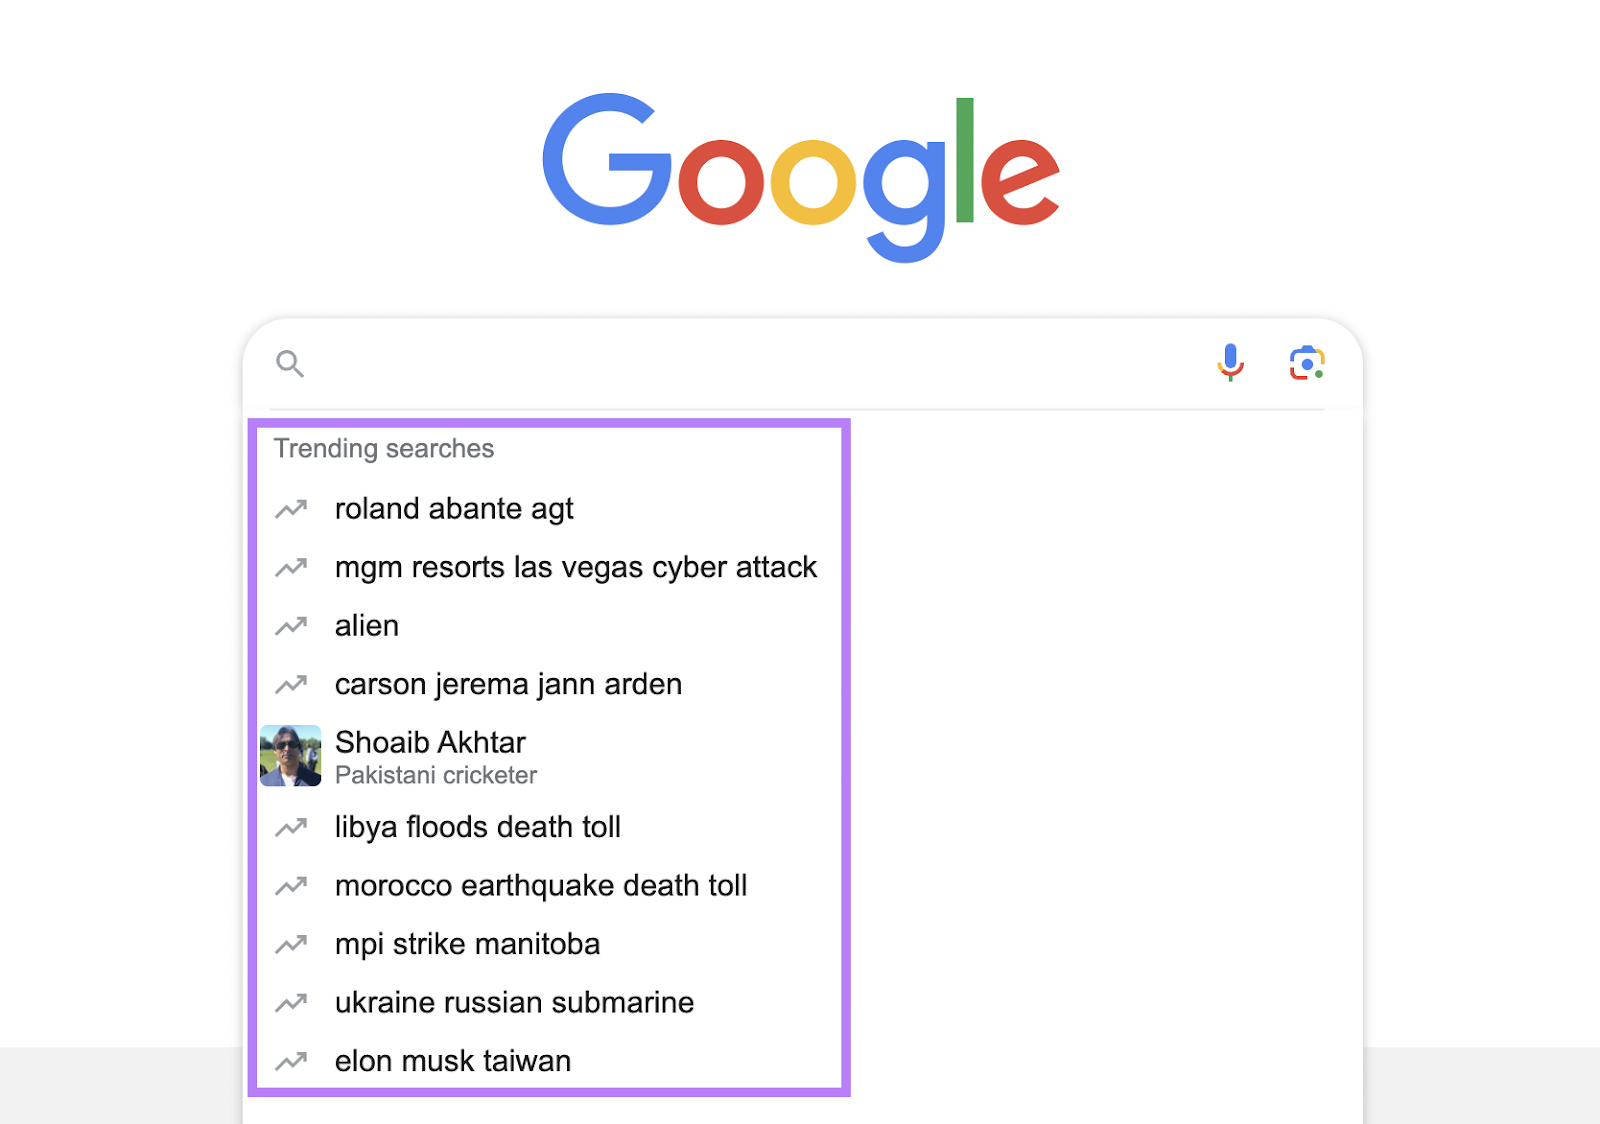 Search suggestions in Google